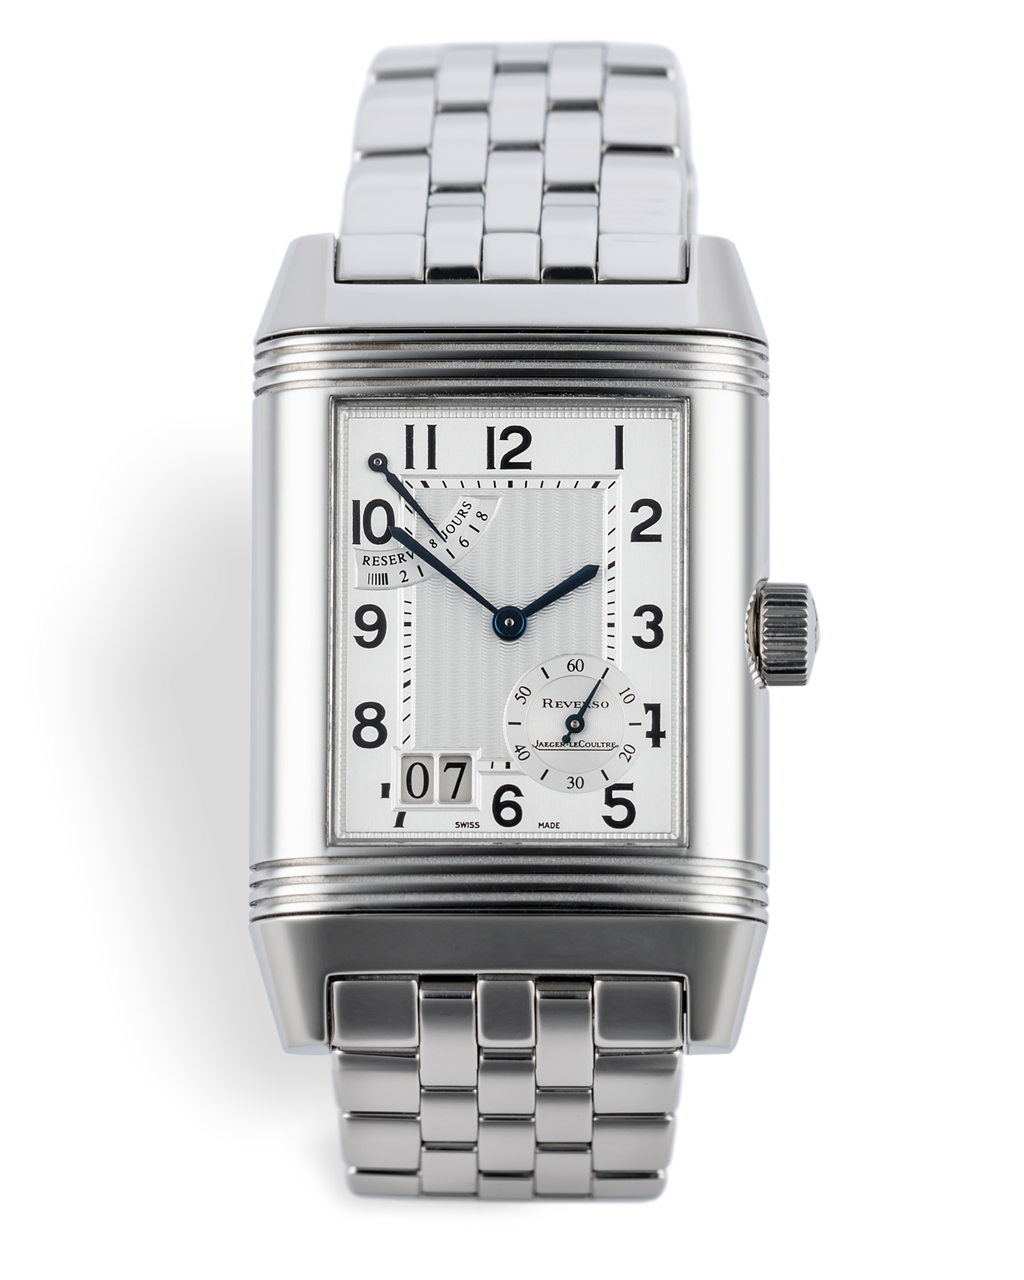 Jaeger-leCoultre Reverso 8 Day Watches | ref 240.8.15 | Service ...